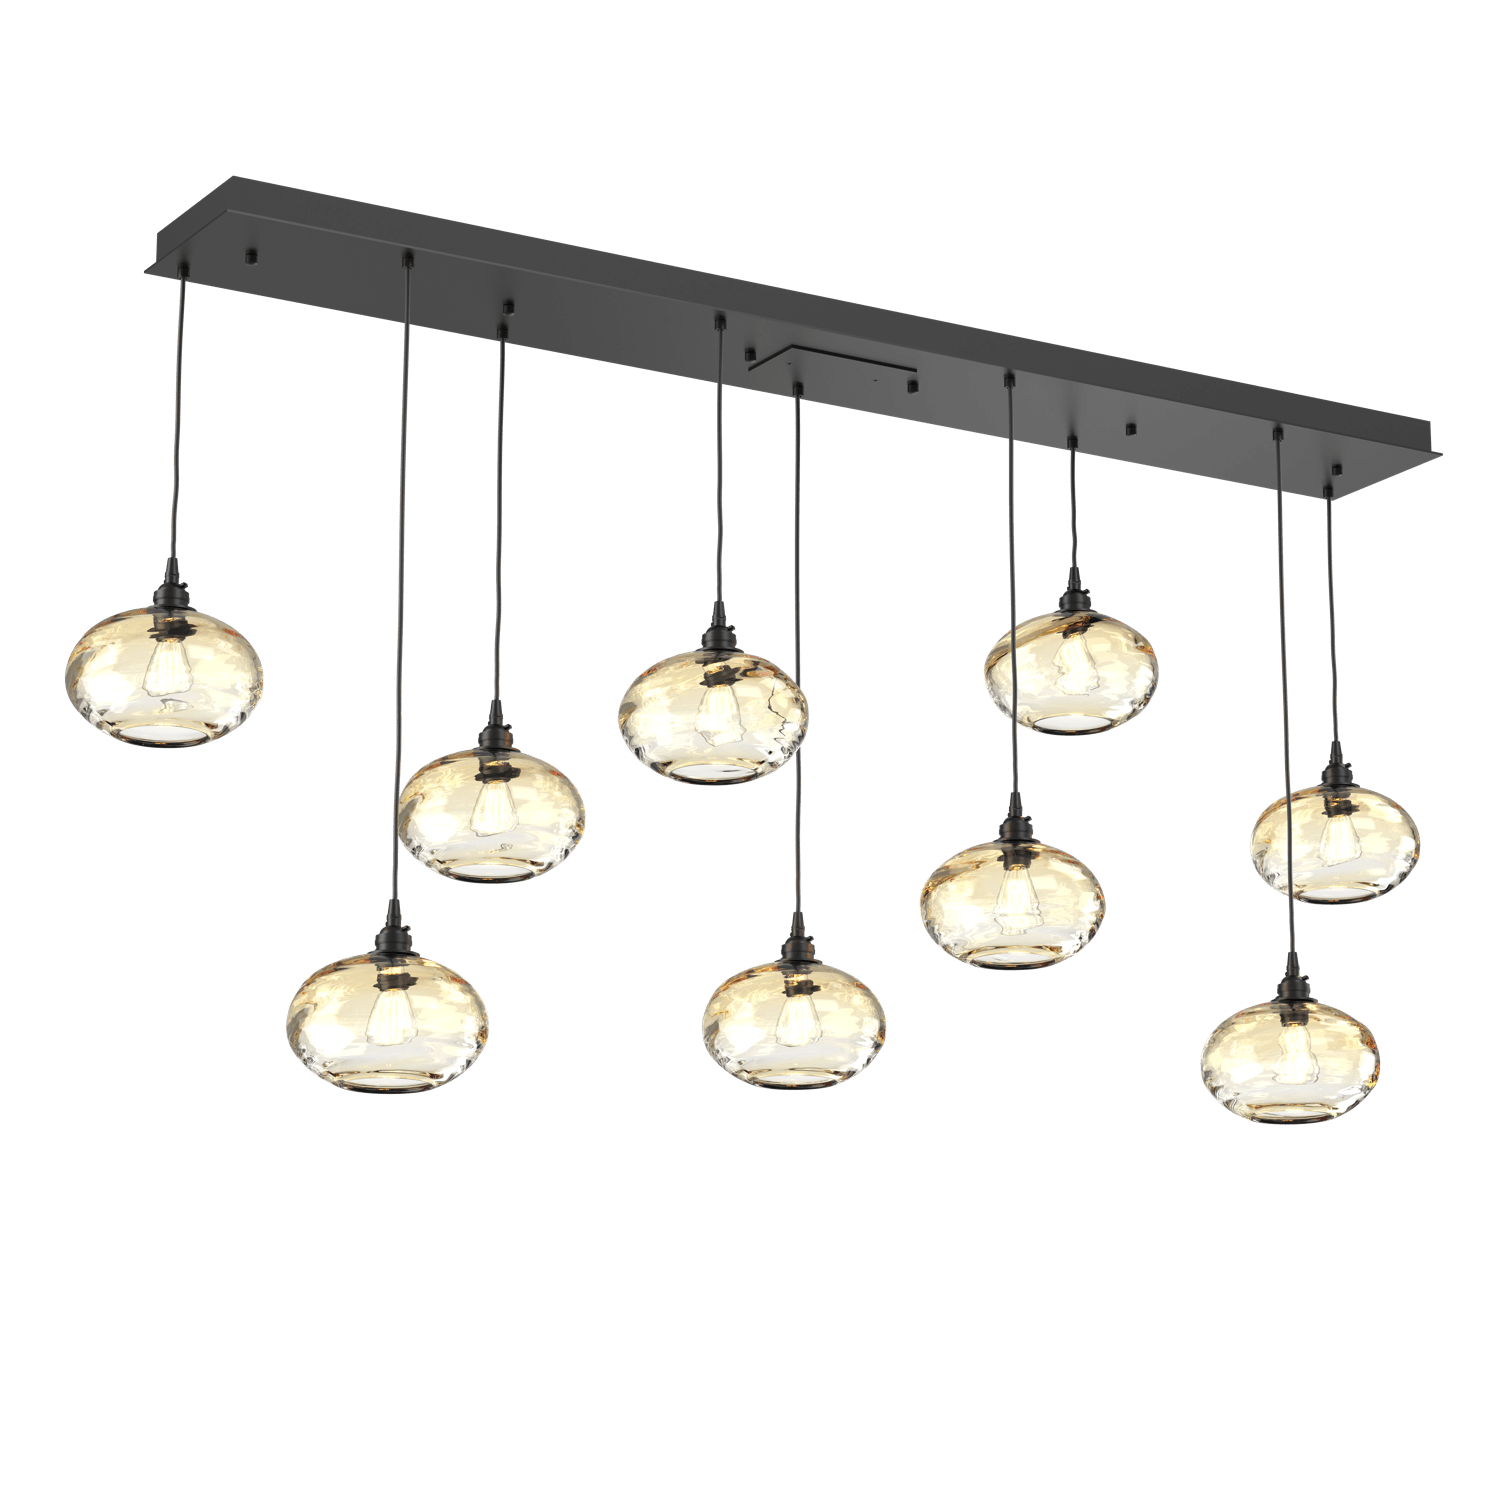 PLB0036-09-MB-OA-Hammerton-Studio-Optic-Blown-Glass-Coppa-9-light-linear-pendant-chandelier-with-matte-black-finish-and-optic-amber-blown-glass-shades-and-incandescent-lamping